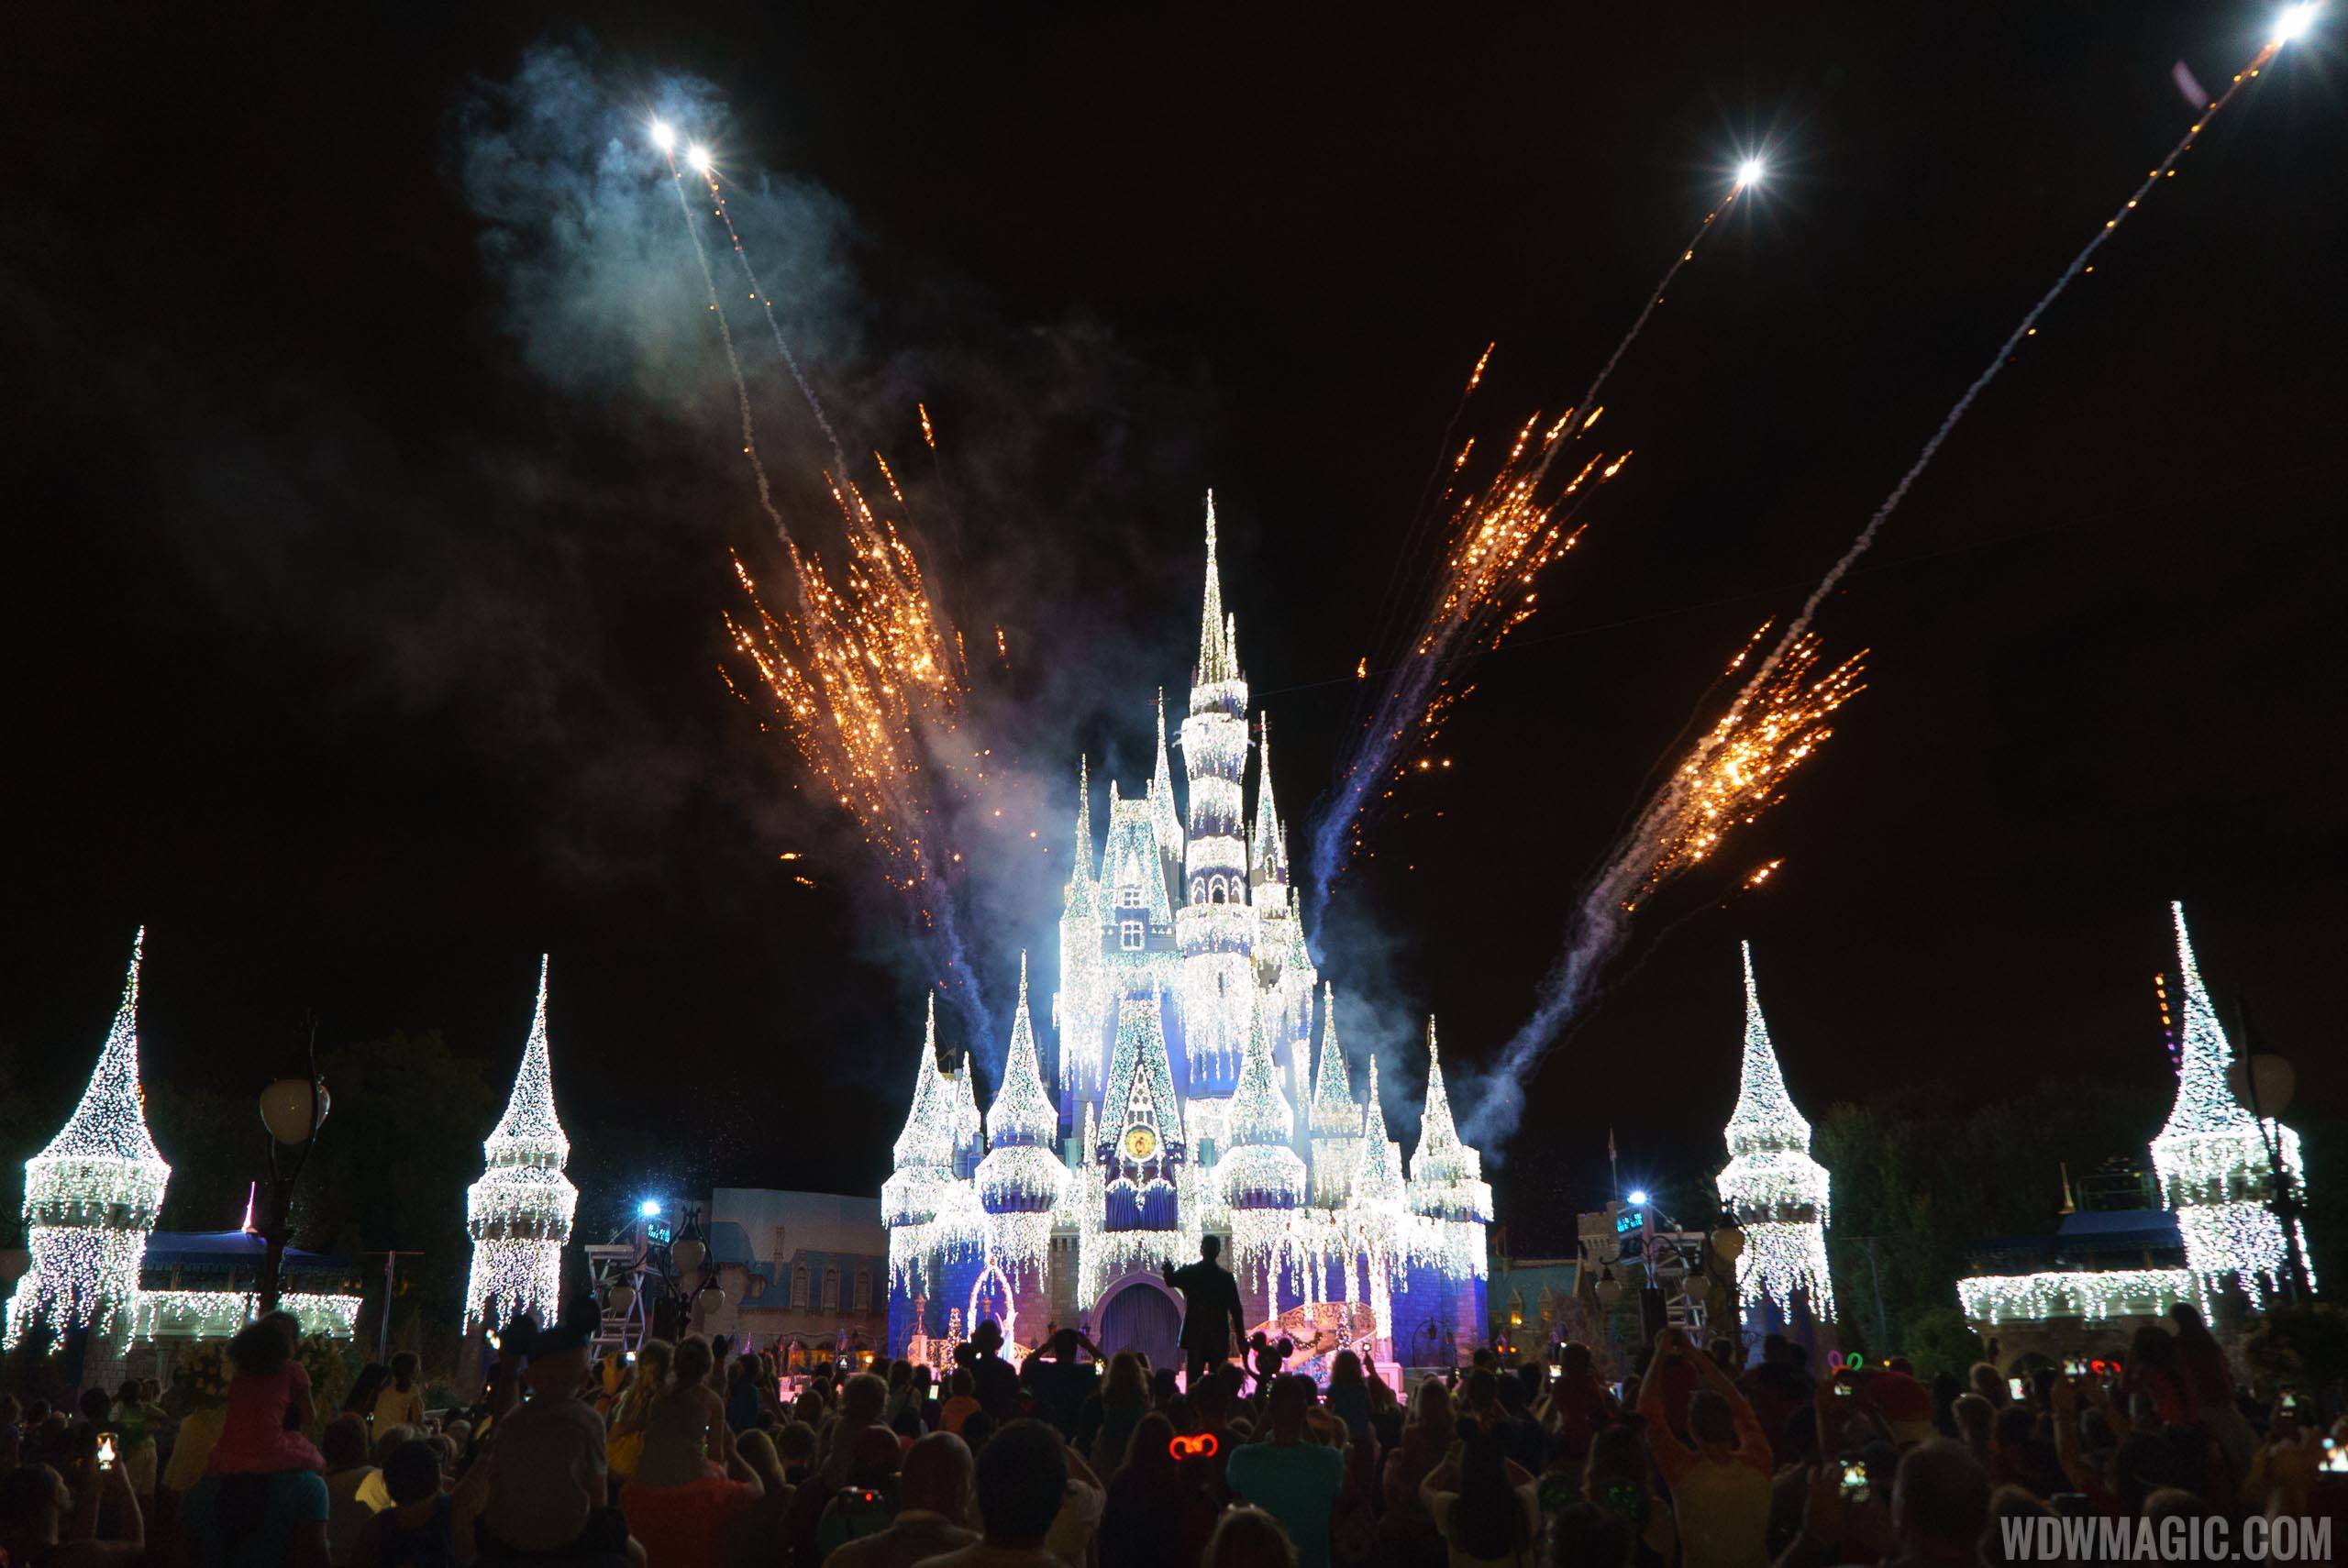 PHOTOS - A look at the newly extended Cinderella Castle dreamlights at the Magic Kingdom